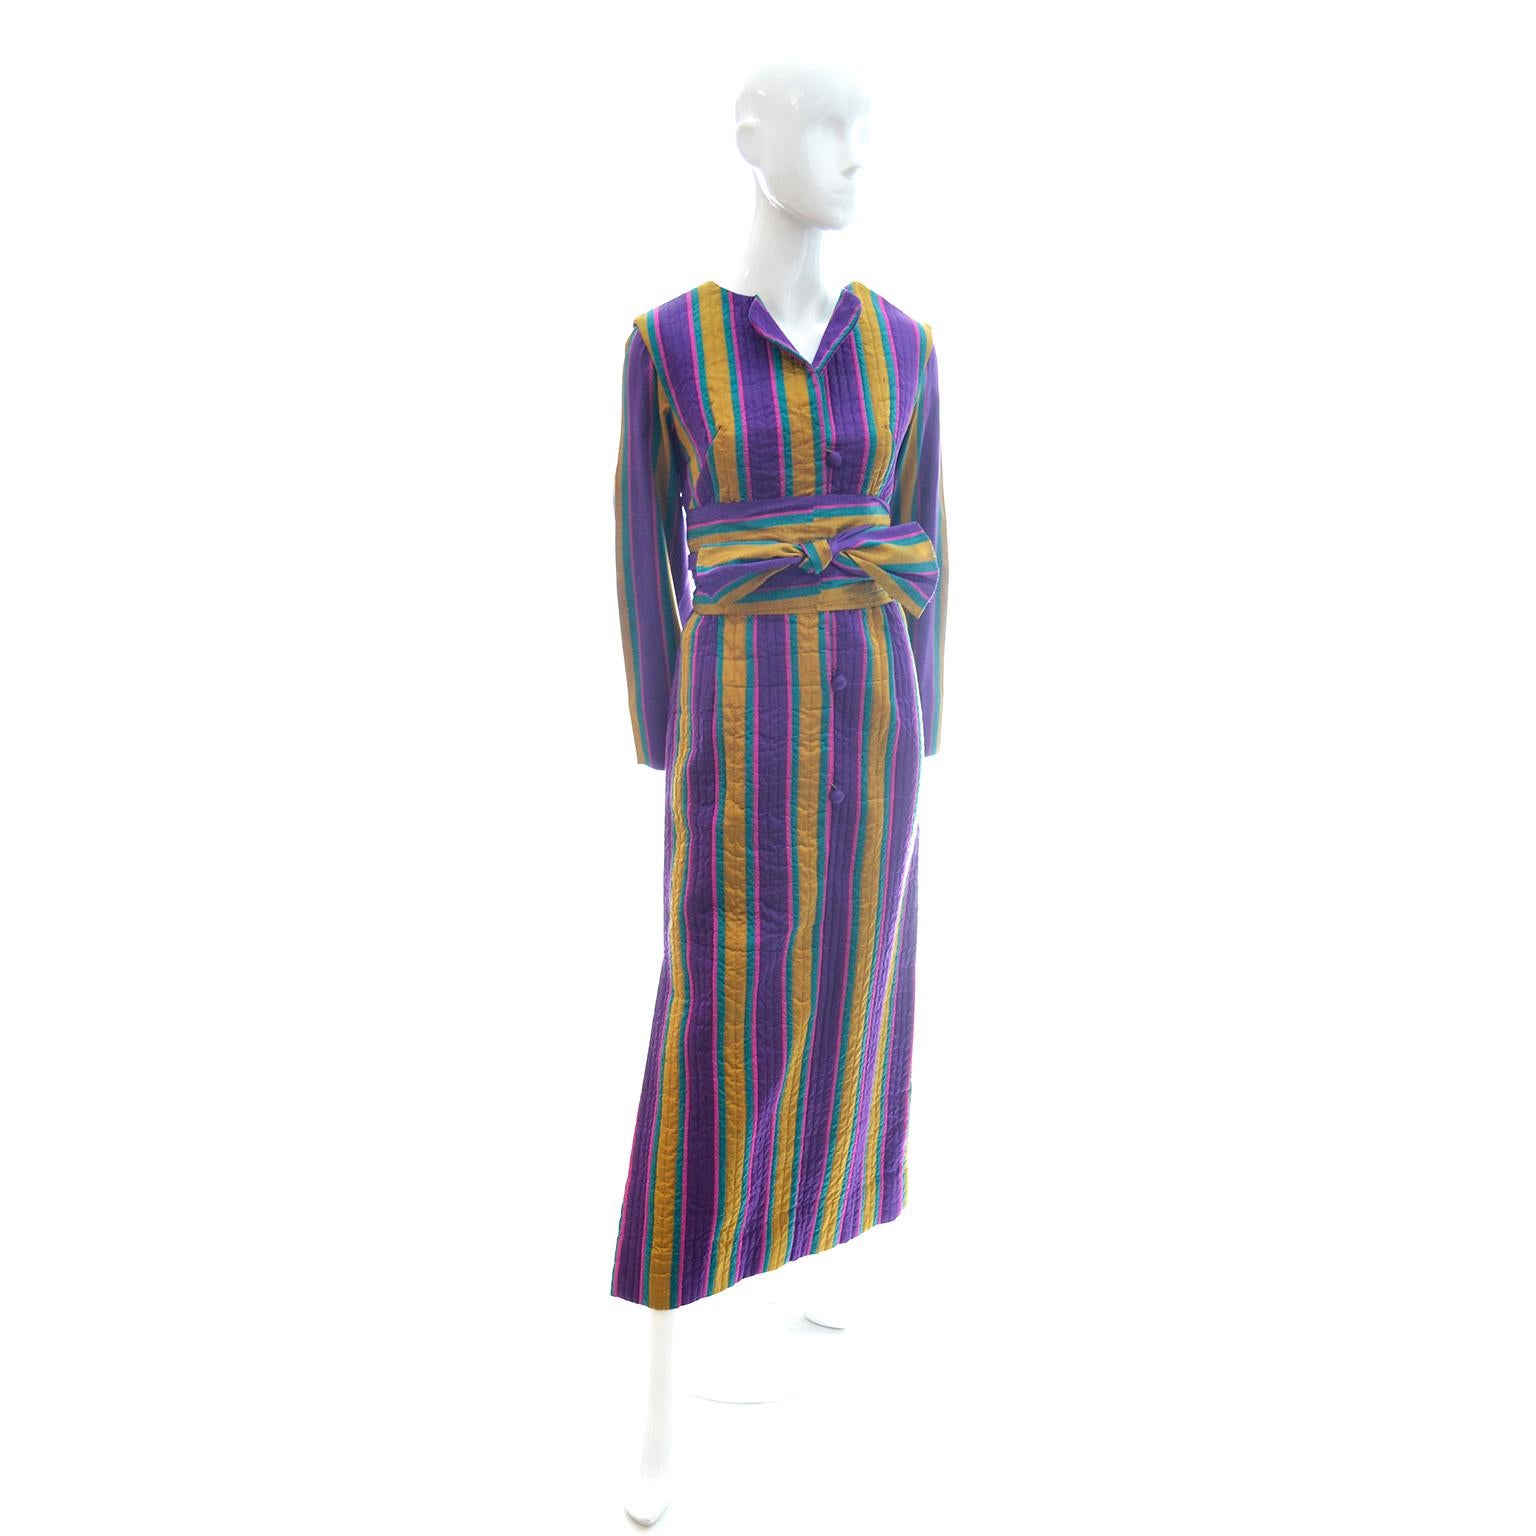 This is a lovely vintage silk caftan that was purchased from Saks Fifth Avenue in the 1970's. The striped 100% silk fabric is in beautiful shades of jewel tones including purple, teal / turquoise blue and gold. The body of the caftan is quilted with